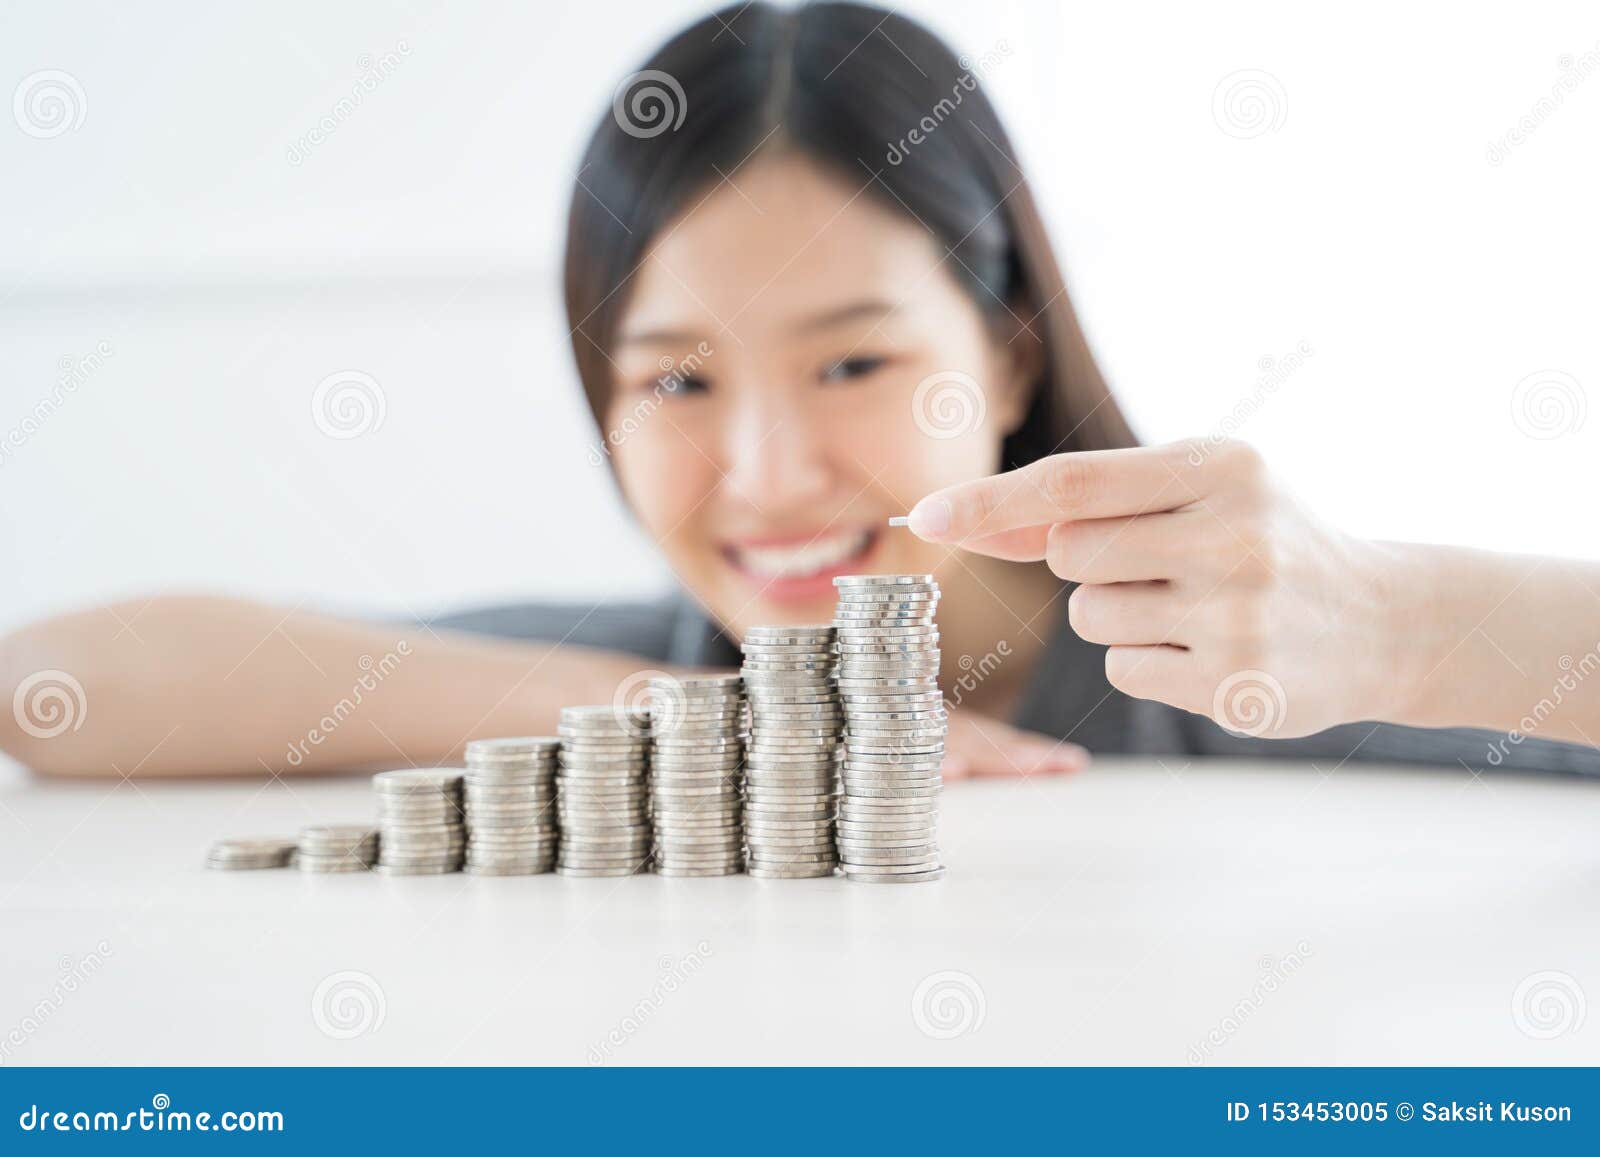 young asian woman making stack of coins. invest save finance concept.